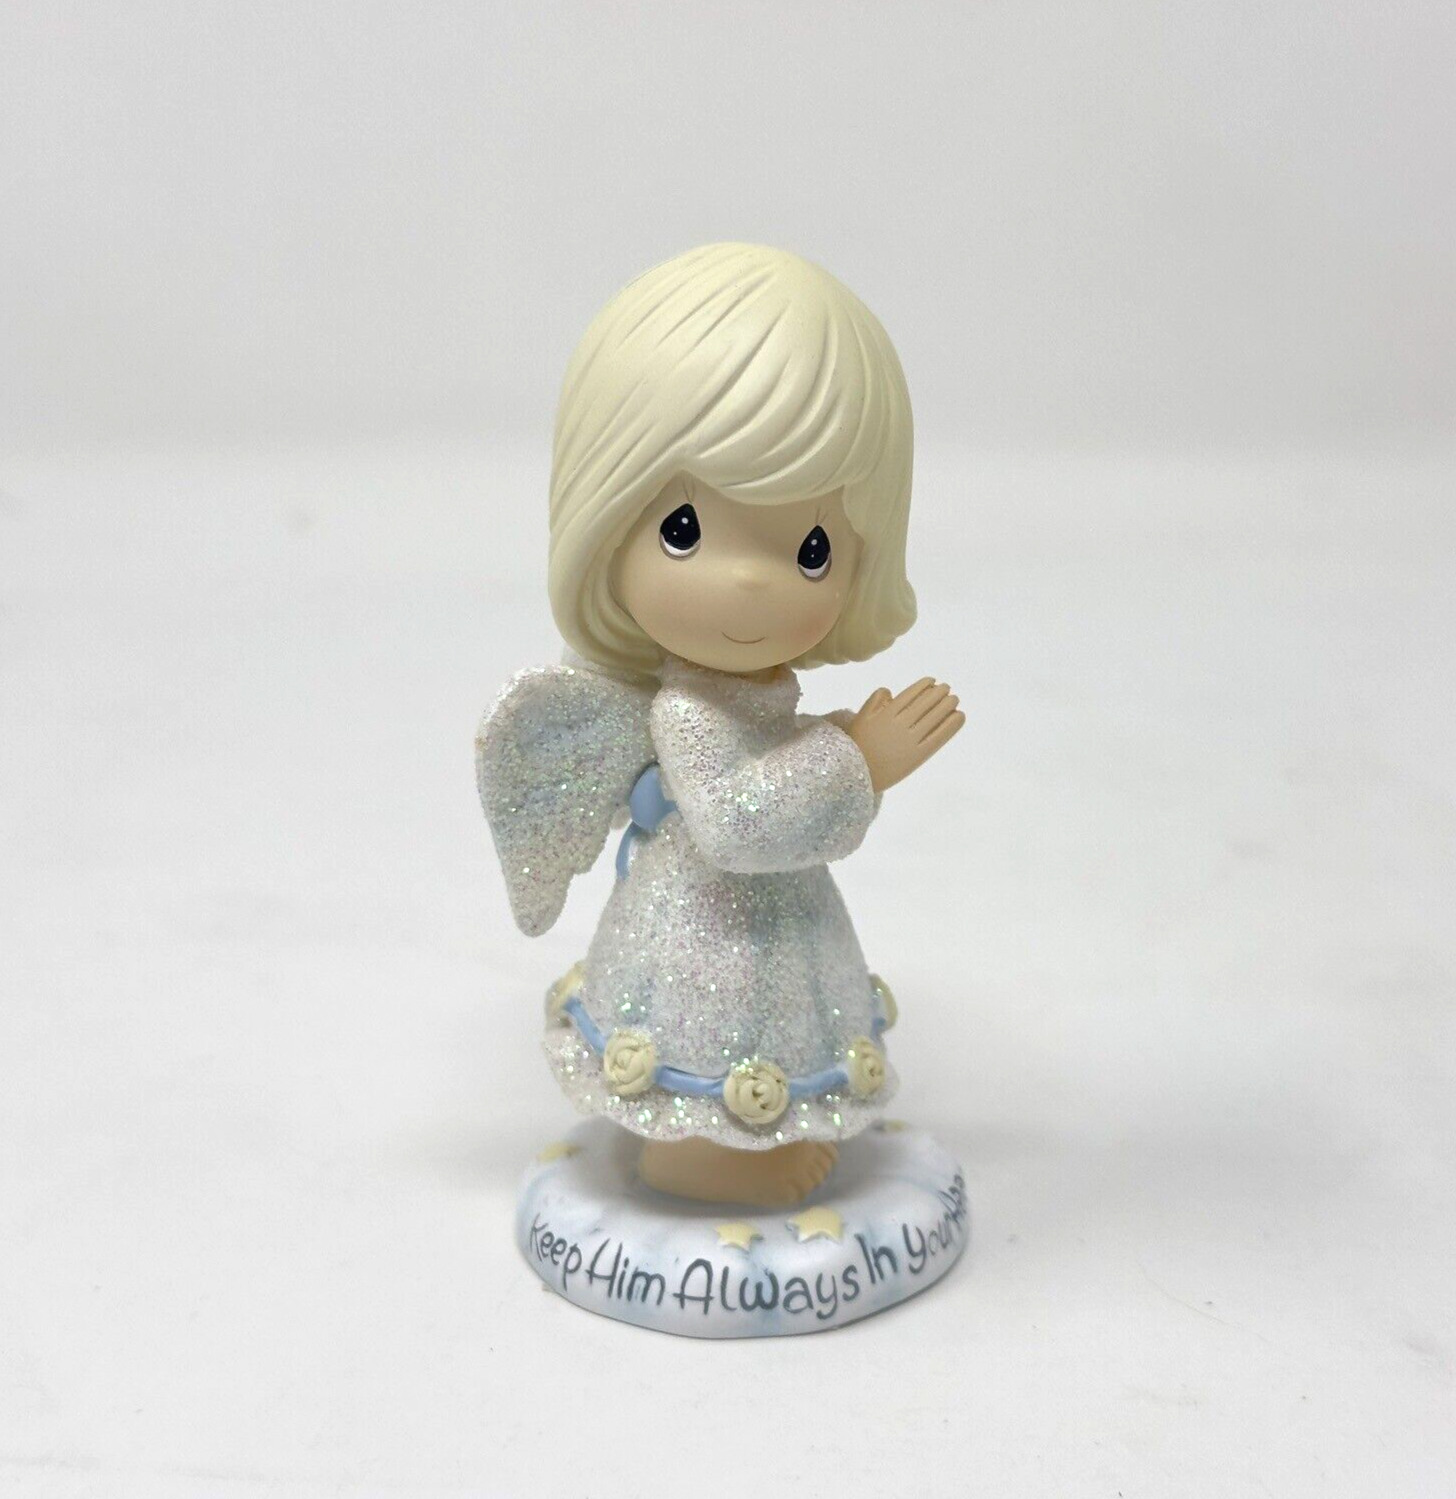 Precious Moments KEEP HIM ALWAYS IN YOUR HEART Figurine #124404 2012